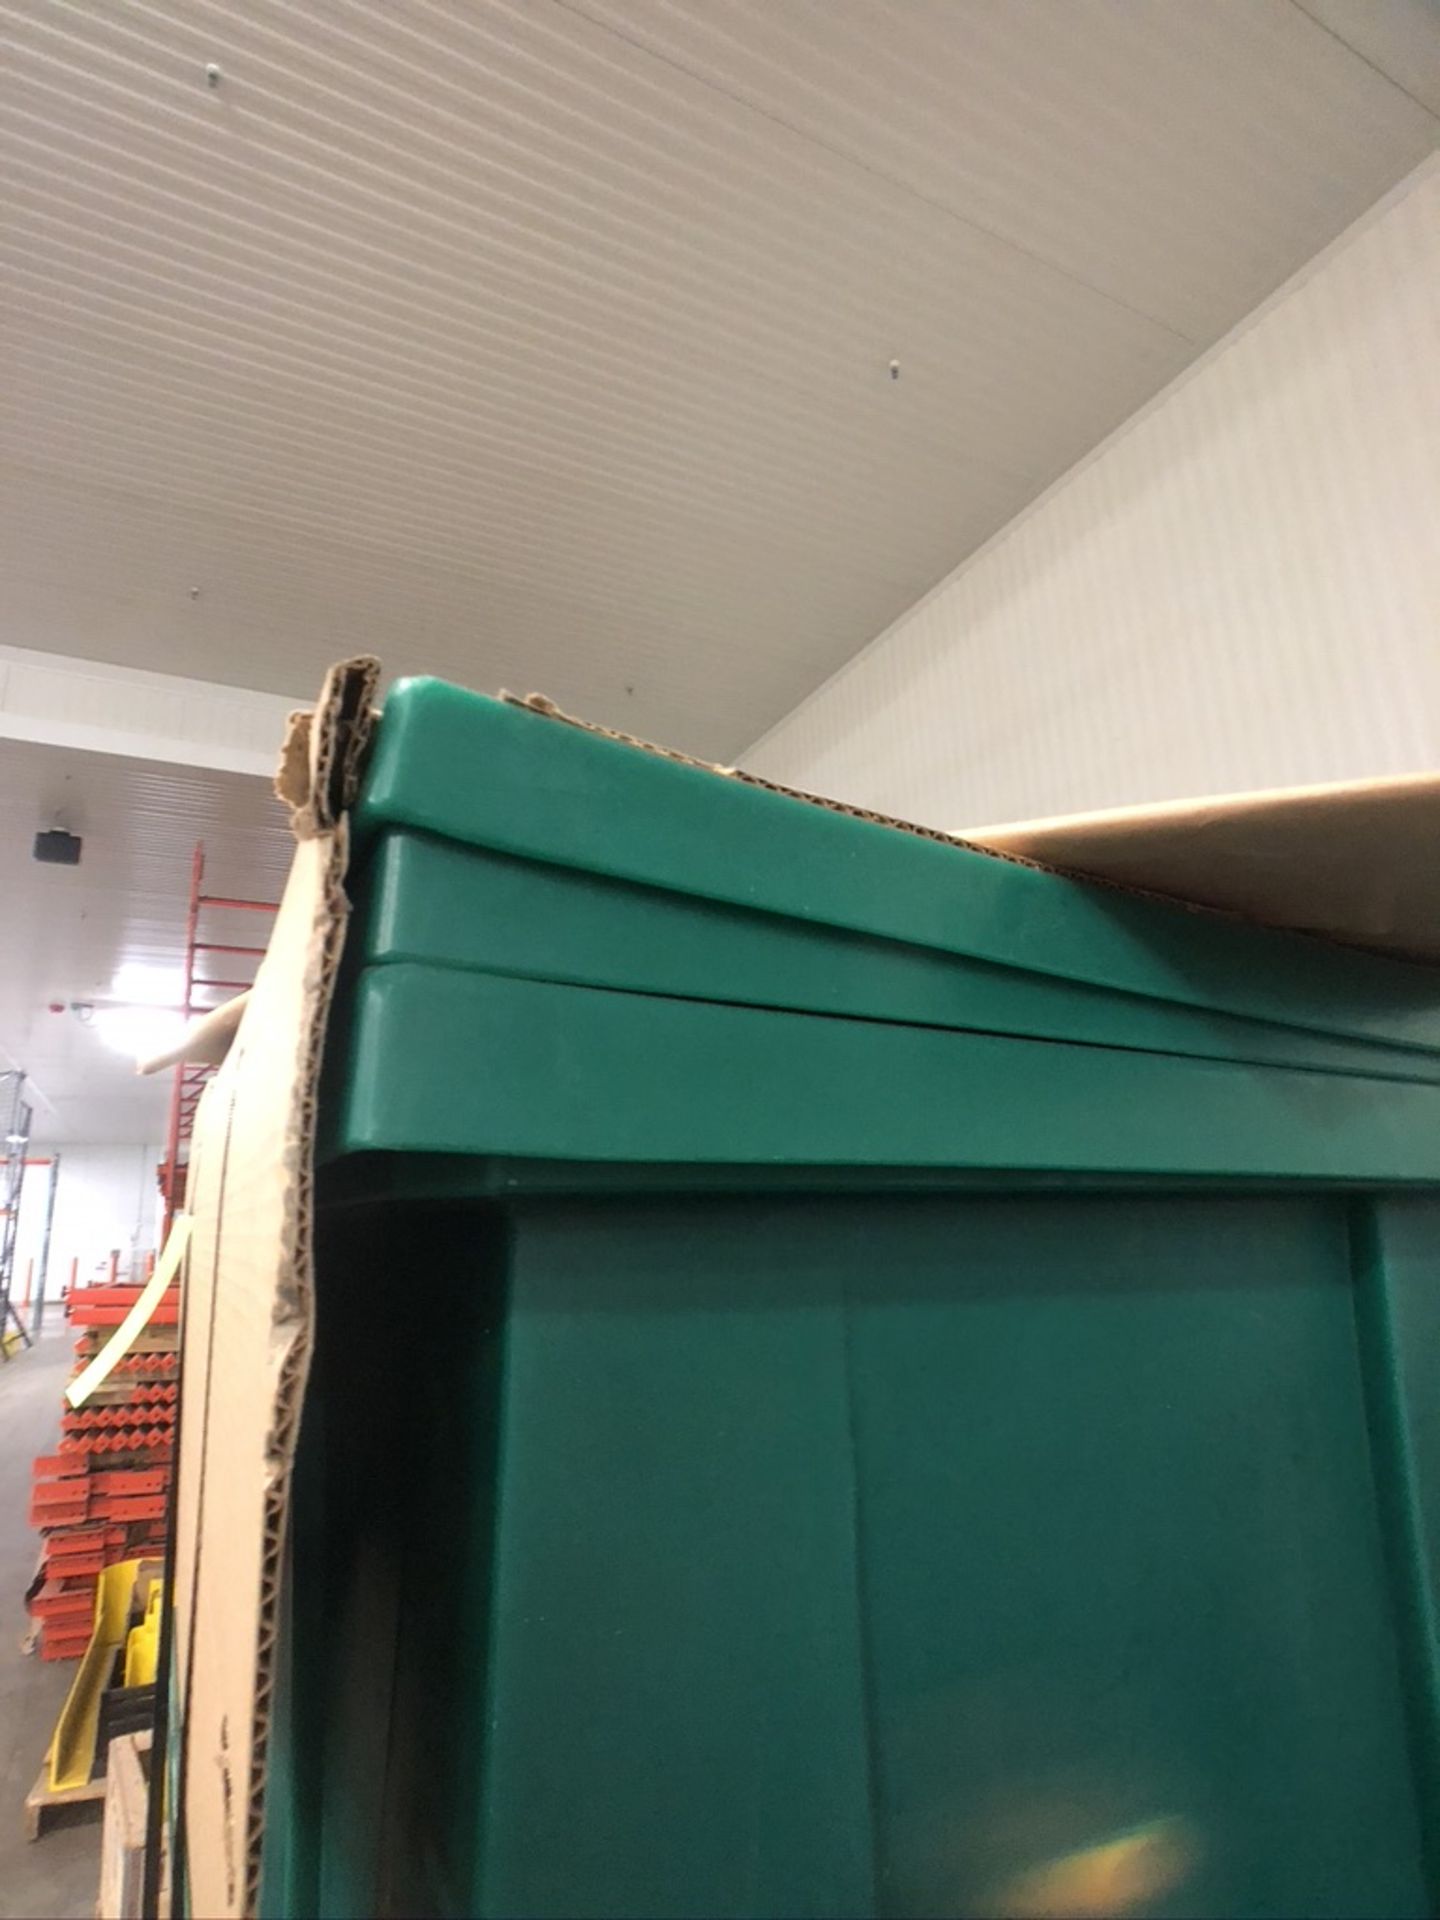 (3) LARGE GREEN FOOD STORAGE BINS APPX DIN. LWH'' 50 X 41 X 33, INCLUDES (3) LIDS - Image 3 of 3